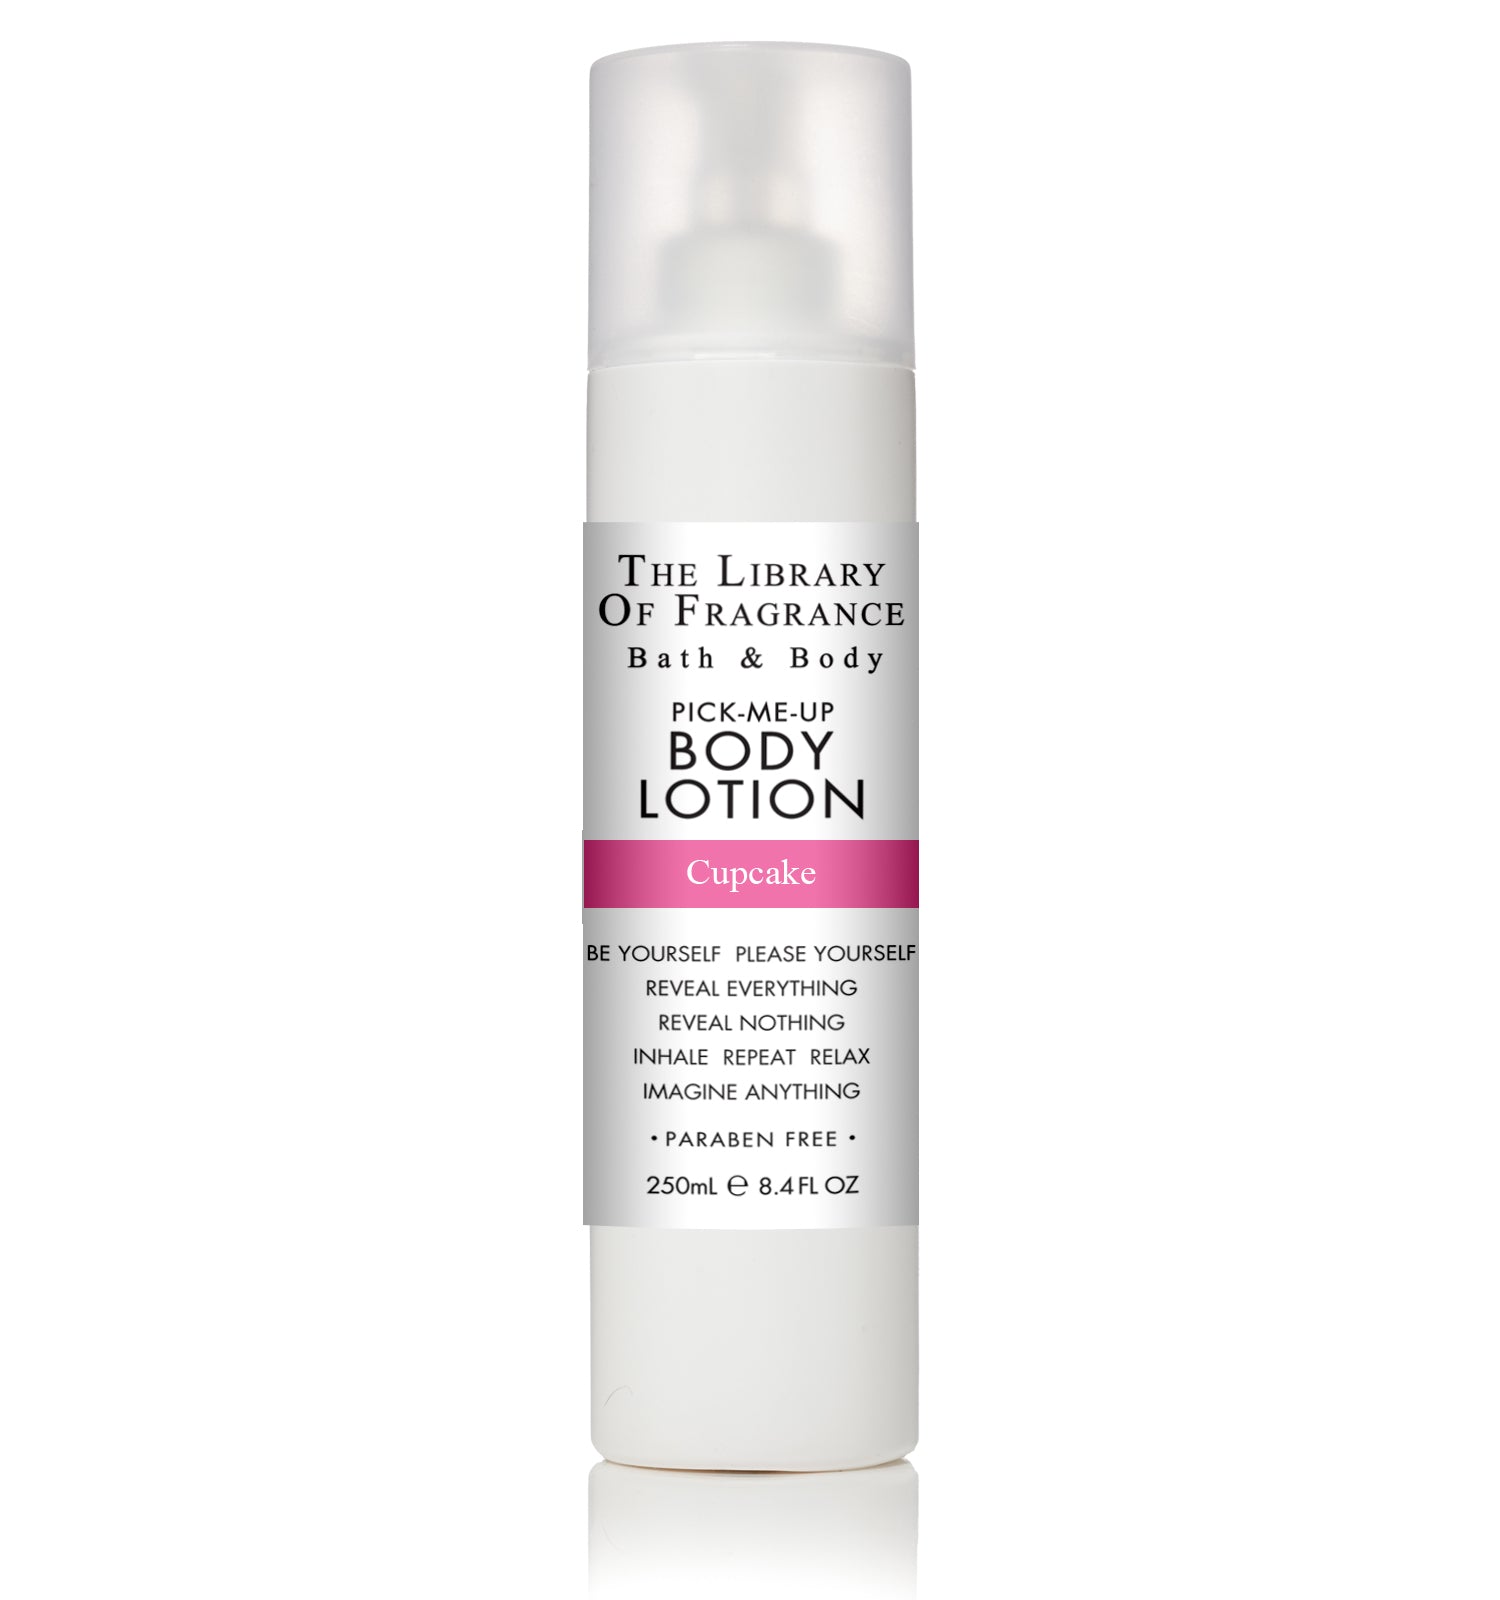 The Library of Fragrance Cupcake Body Lotion 250ml AKA Demeter Fragrance